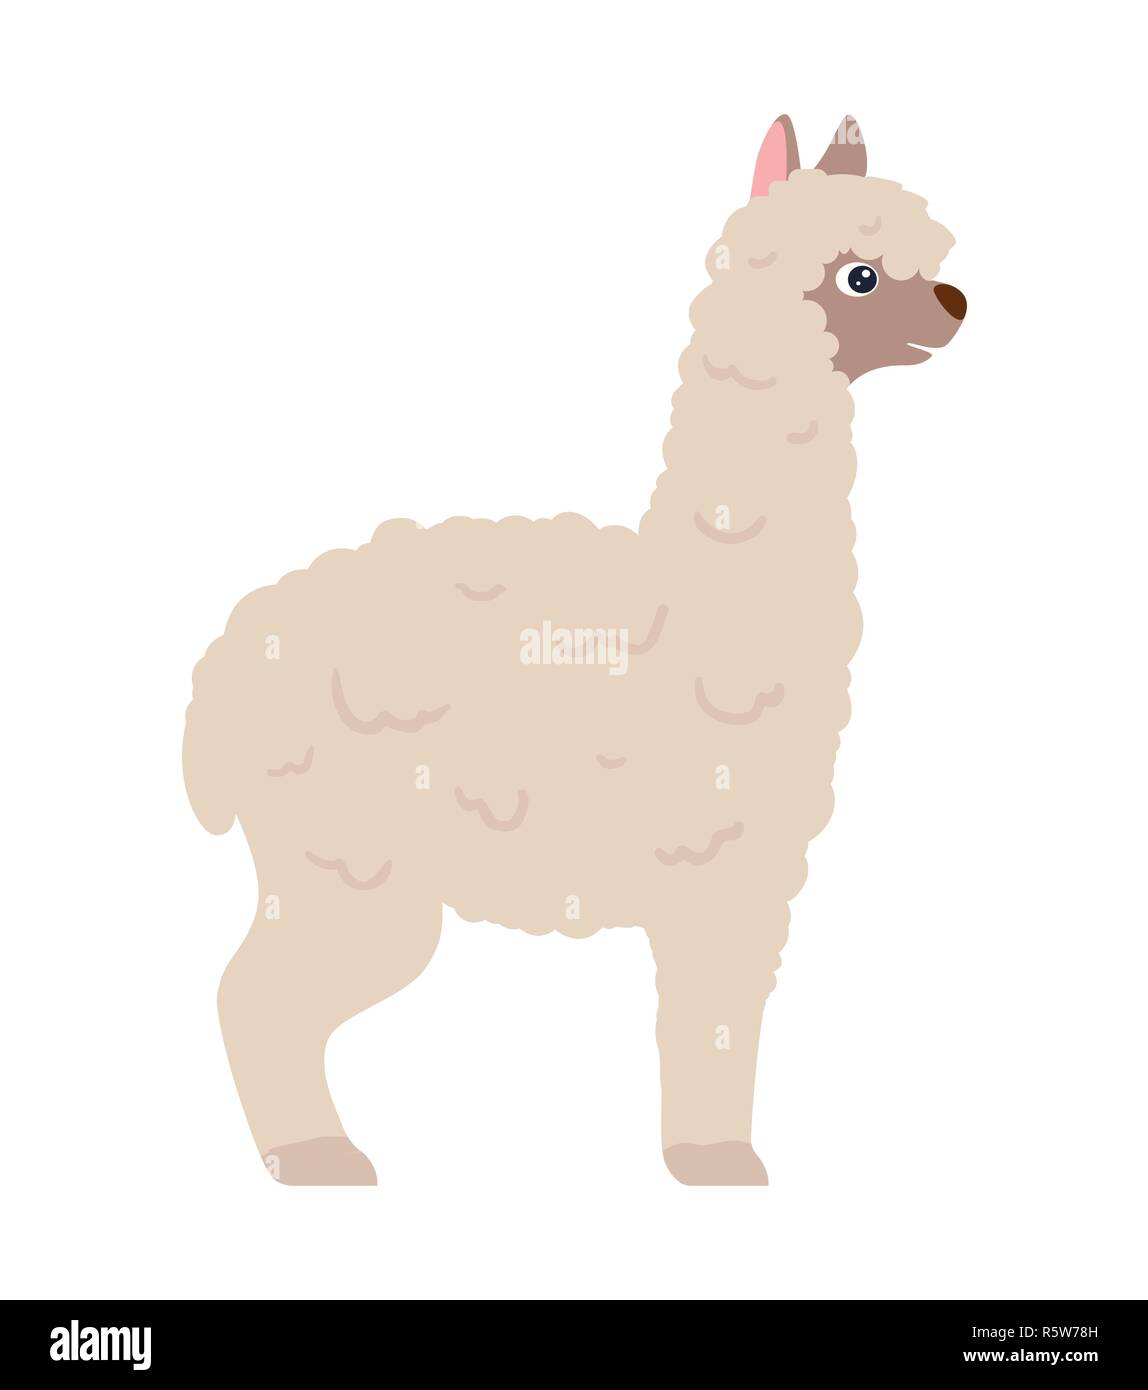 White lama alpaca, side view vector illustration, white background isolated. Stock Vector